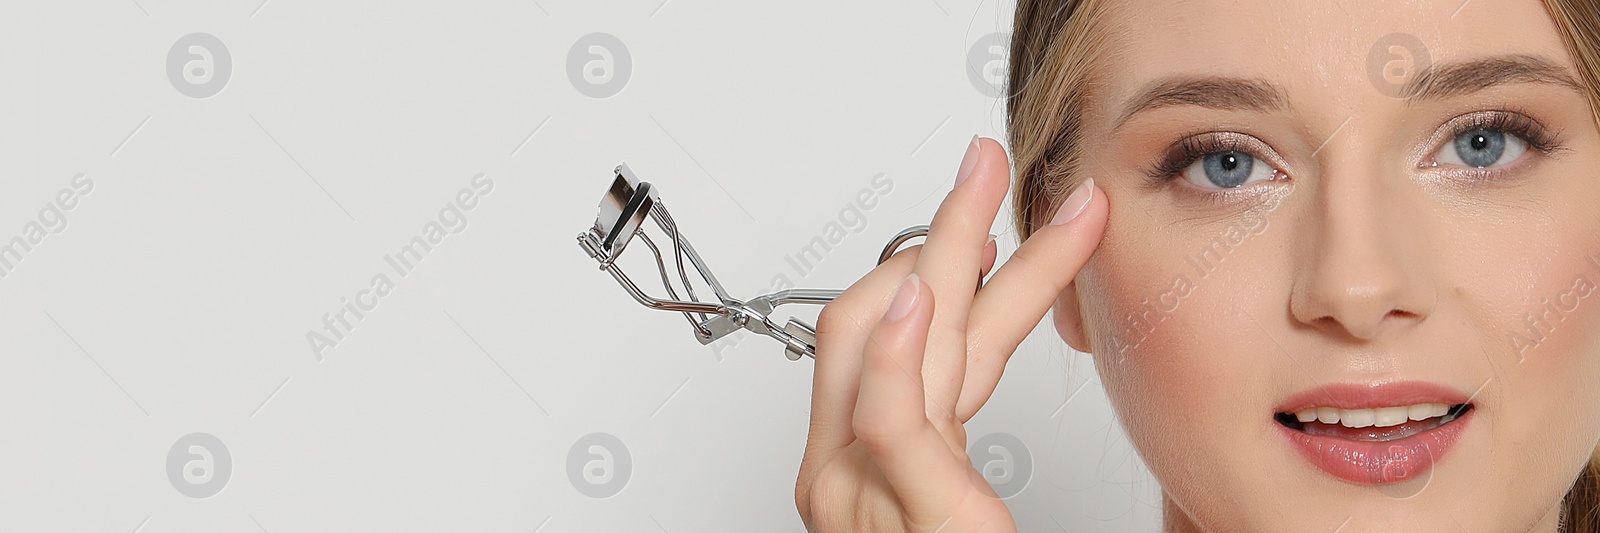 Image of Young woman holding eyelash curler on white background, space for text. Banner design